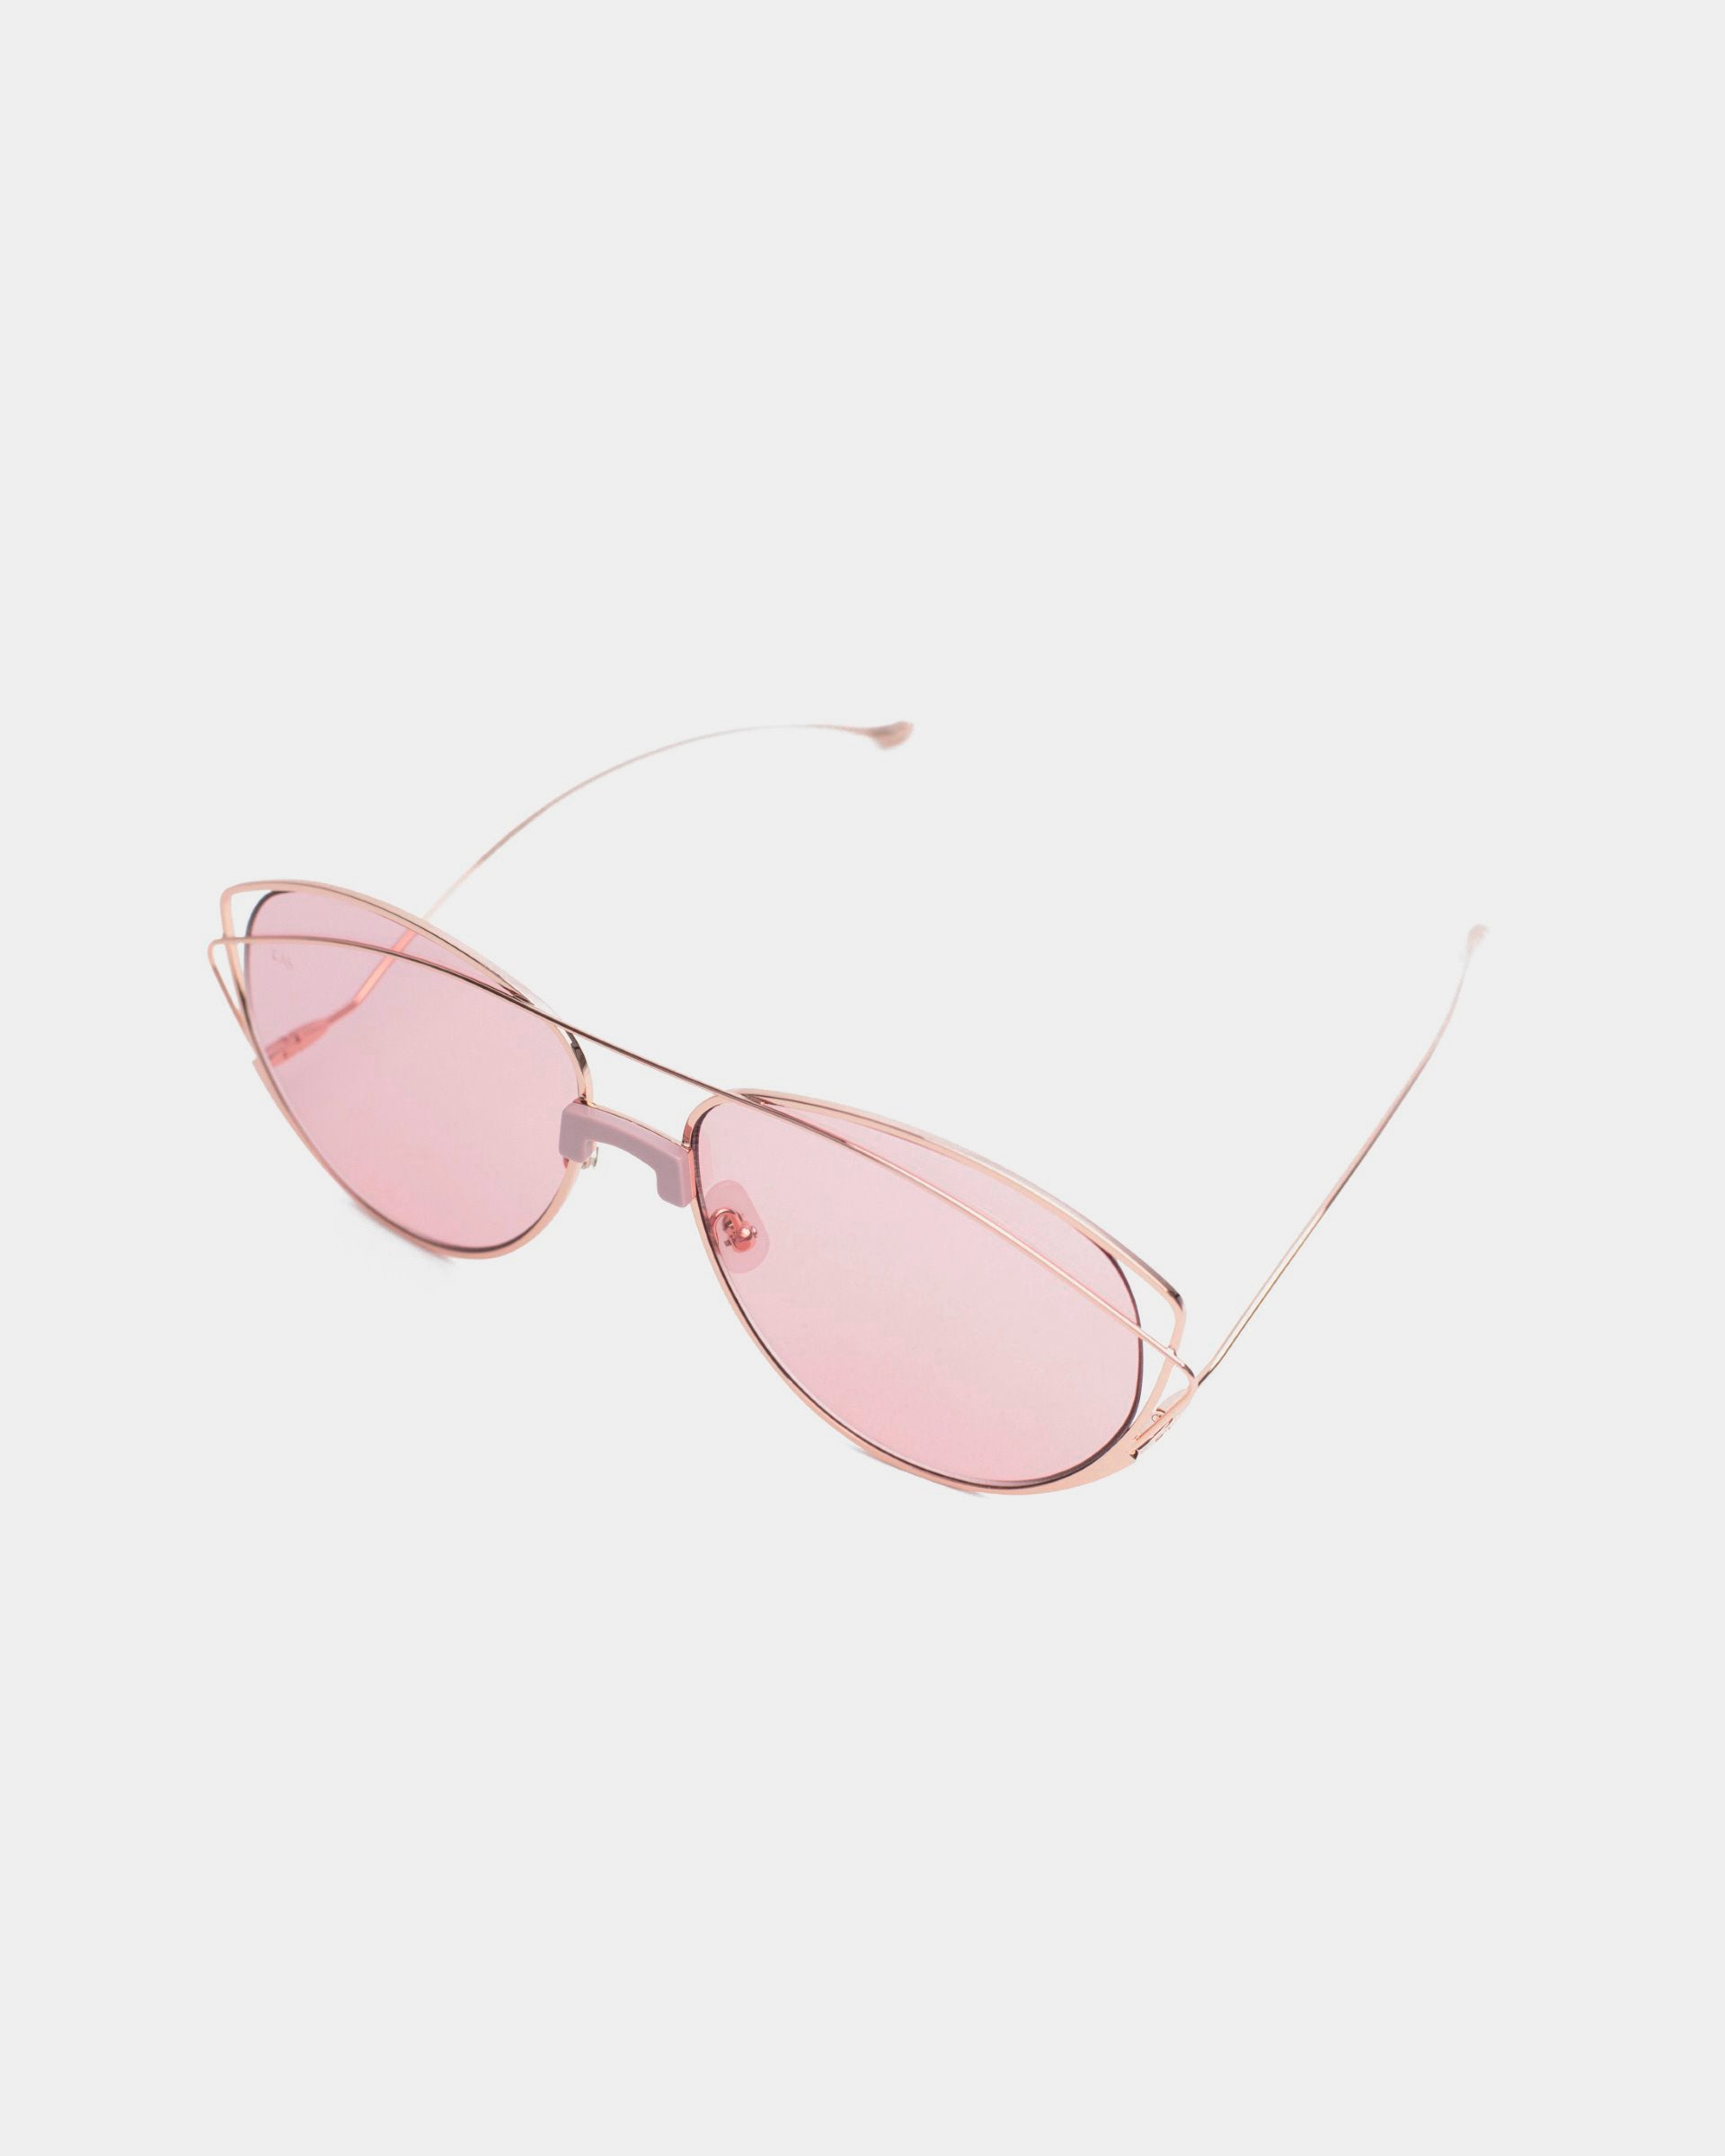 A pair of For Art&#39;s Sake® Dark Eyes sunglasses with pink-tinted, nylon lenses and thin, rose gold frames offering 100% UV protection, laid on a white background.